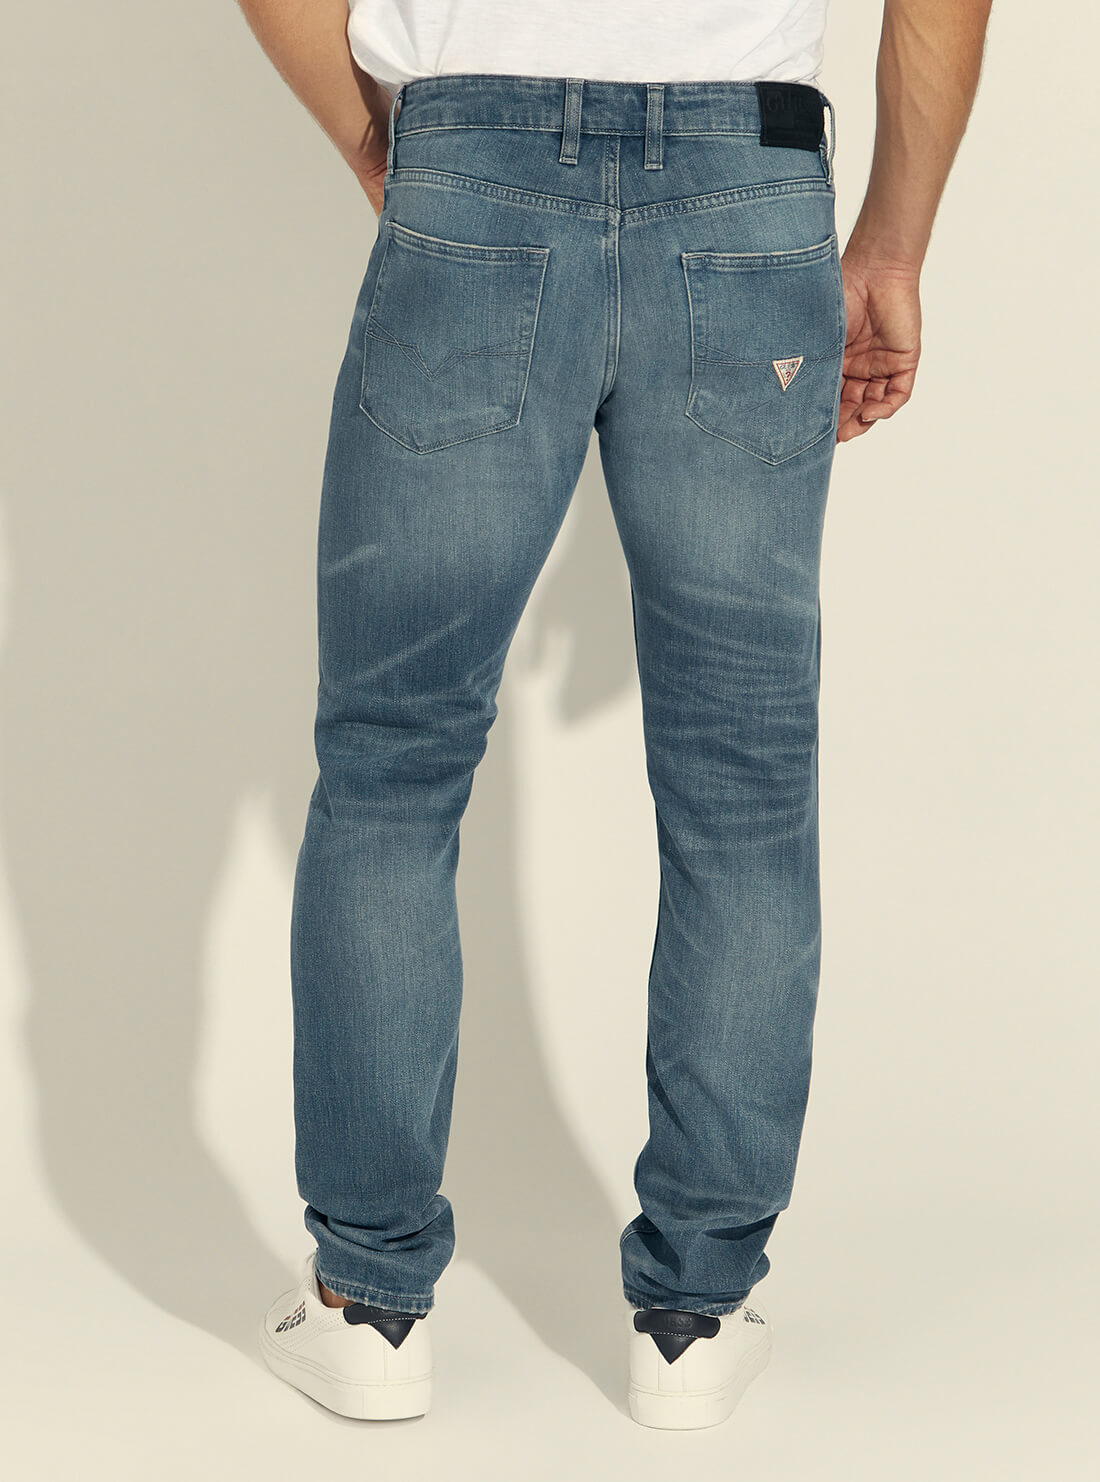 GUESS Mens Mid-Rise Slim Tapered Denim Jeans In Silverstar Wash M1BAS2D3Y43 Back View